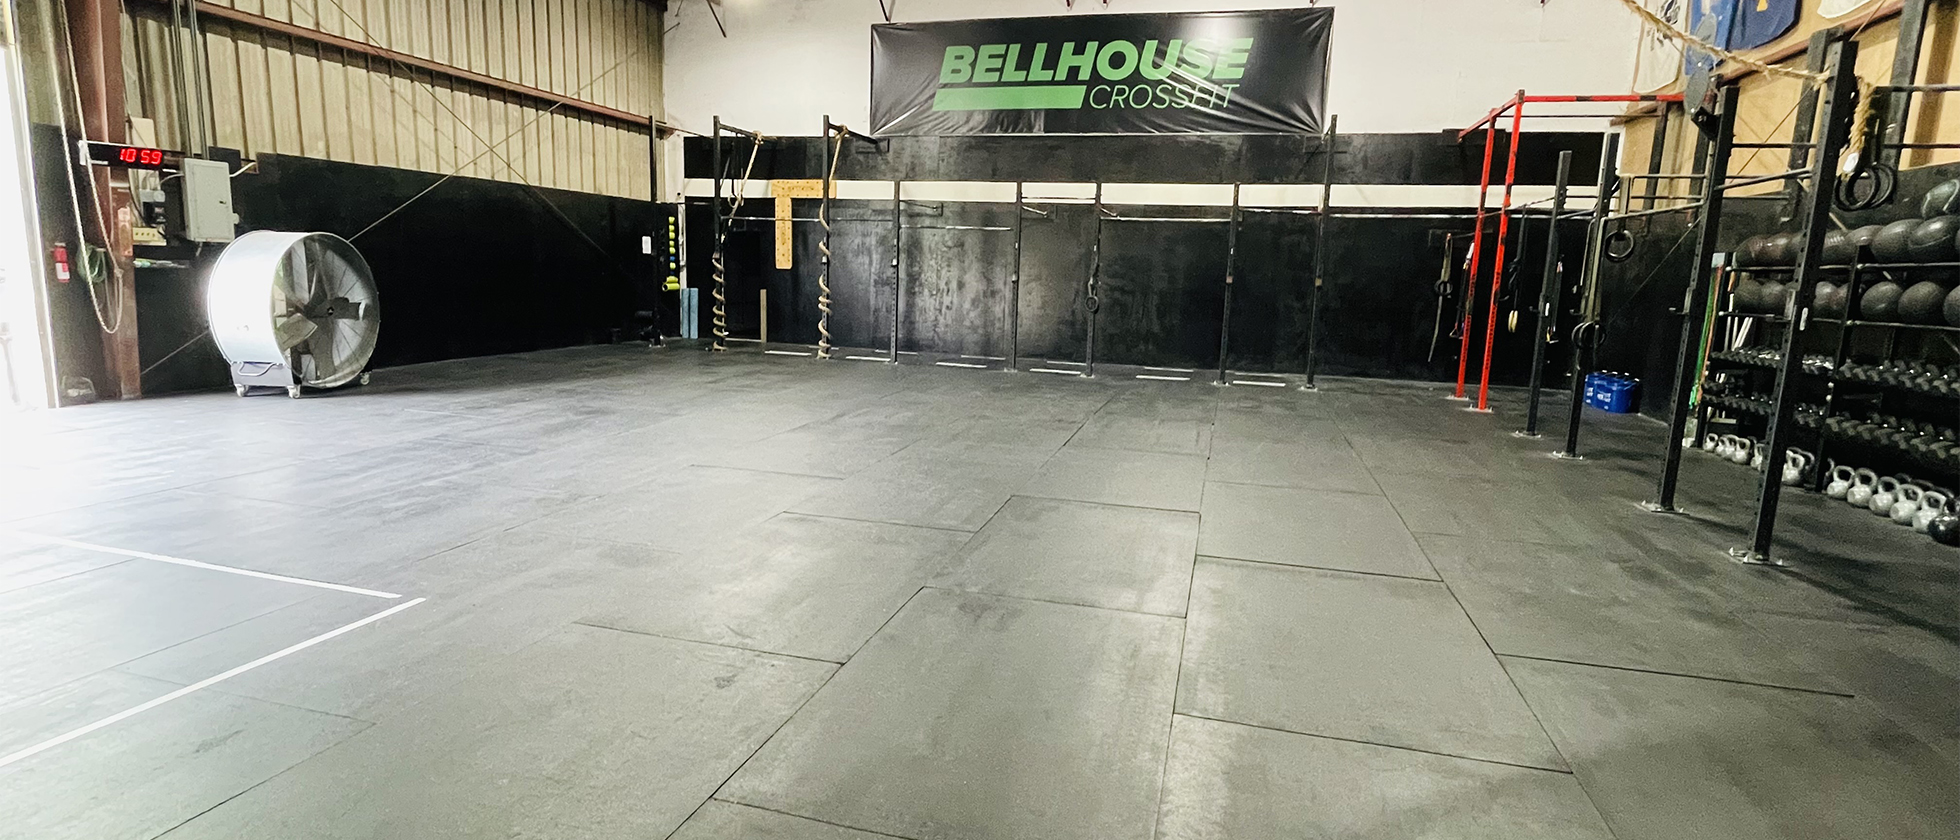 Why BellHouse CrossFit Is Ranked One of The Best Gyms In Baytown